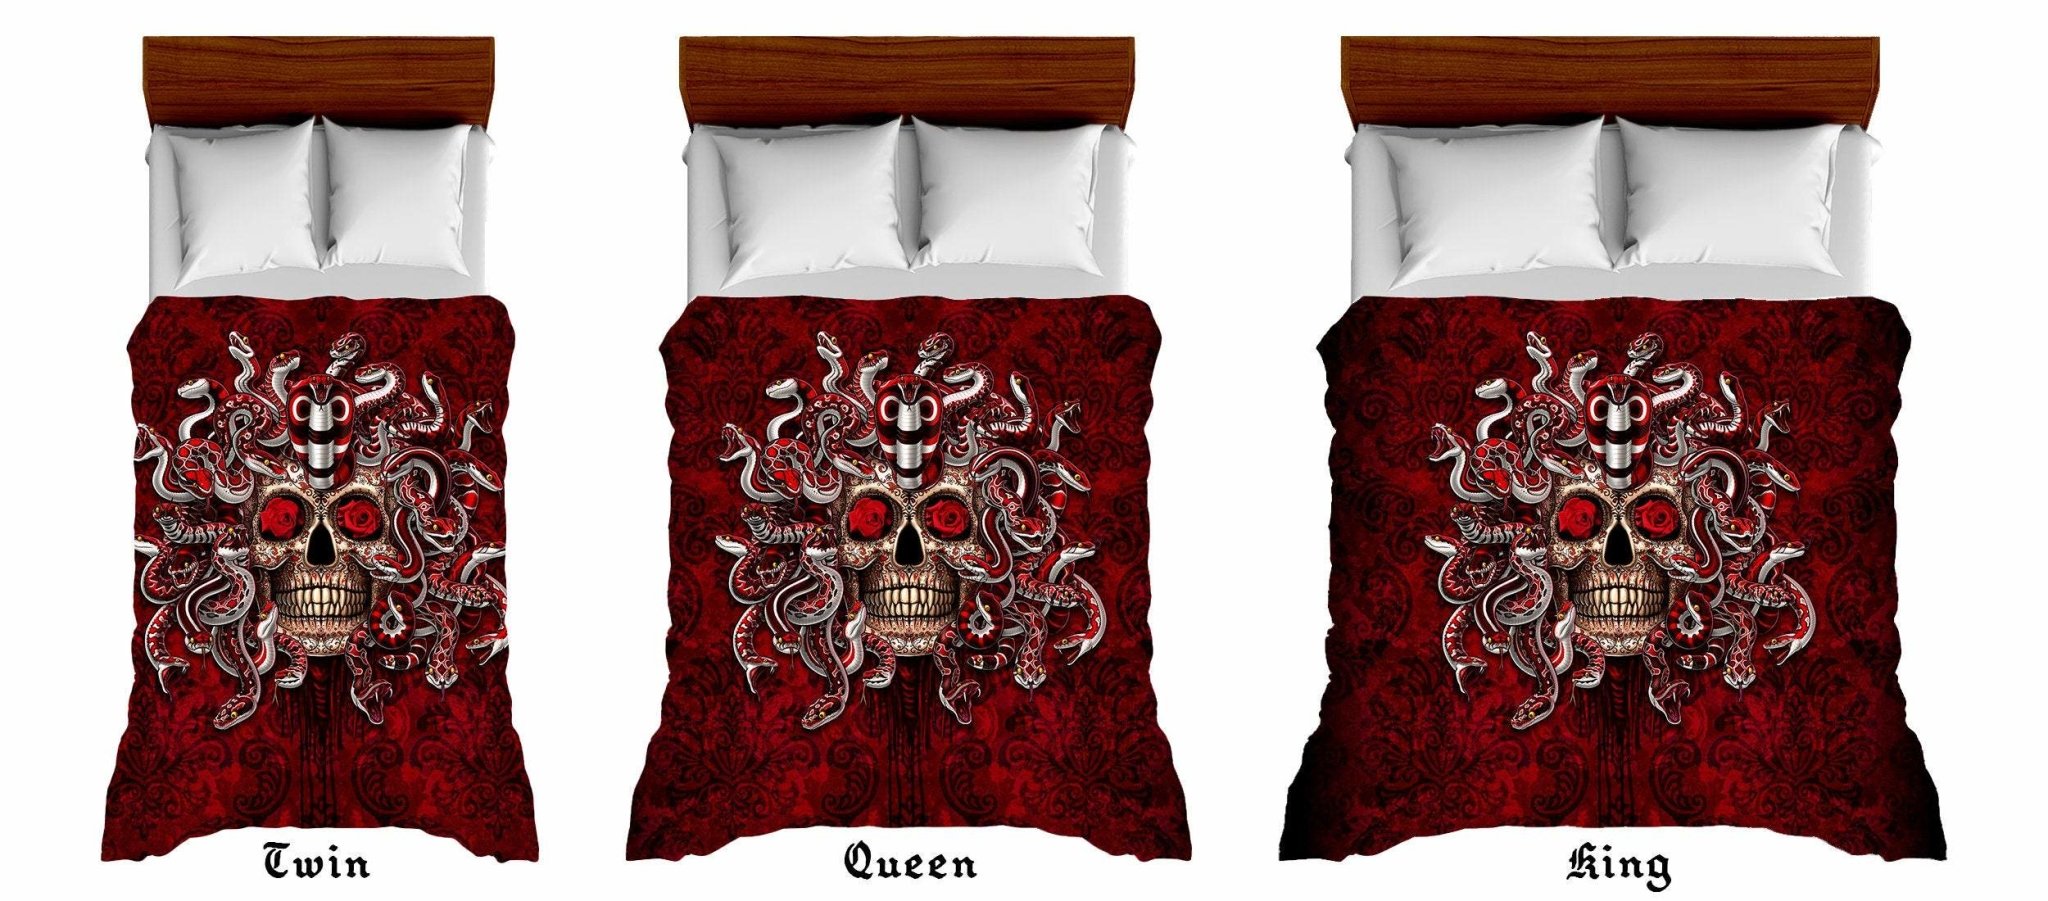 Sugar Skull Bedding Set, Comforter and Duvet, Medusa, Gothic Bed Cover and Bedroom Decor, King, Queen and Twin Size - Day of the Dead, Dia de los Muertos - Abysm Internal